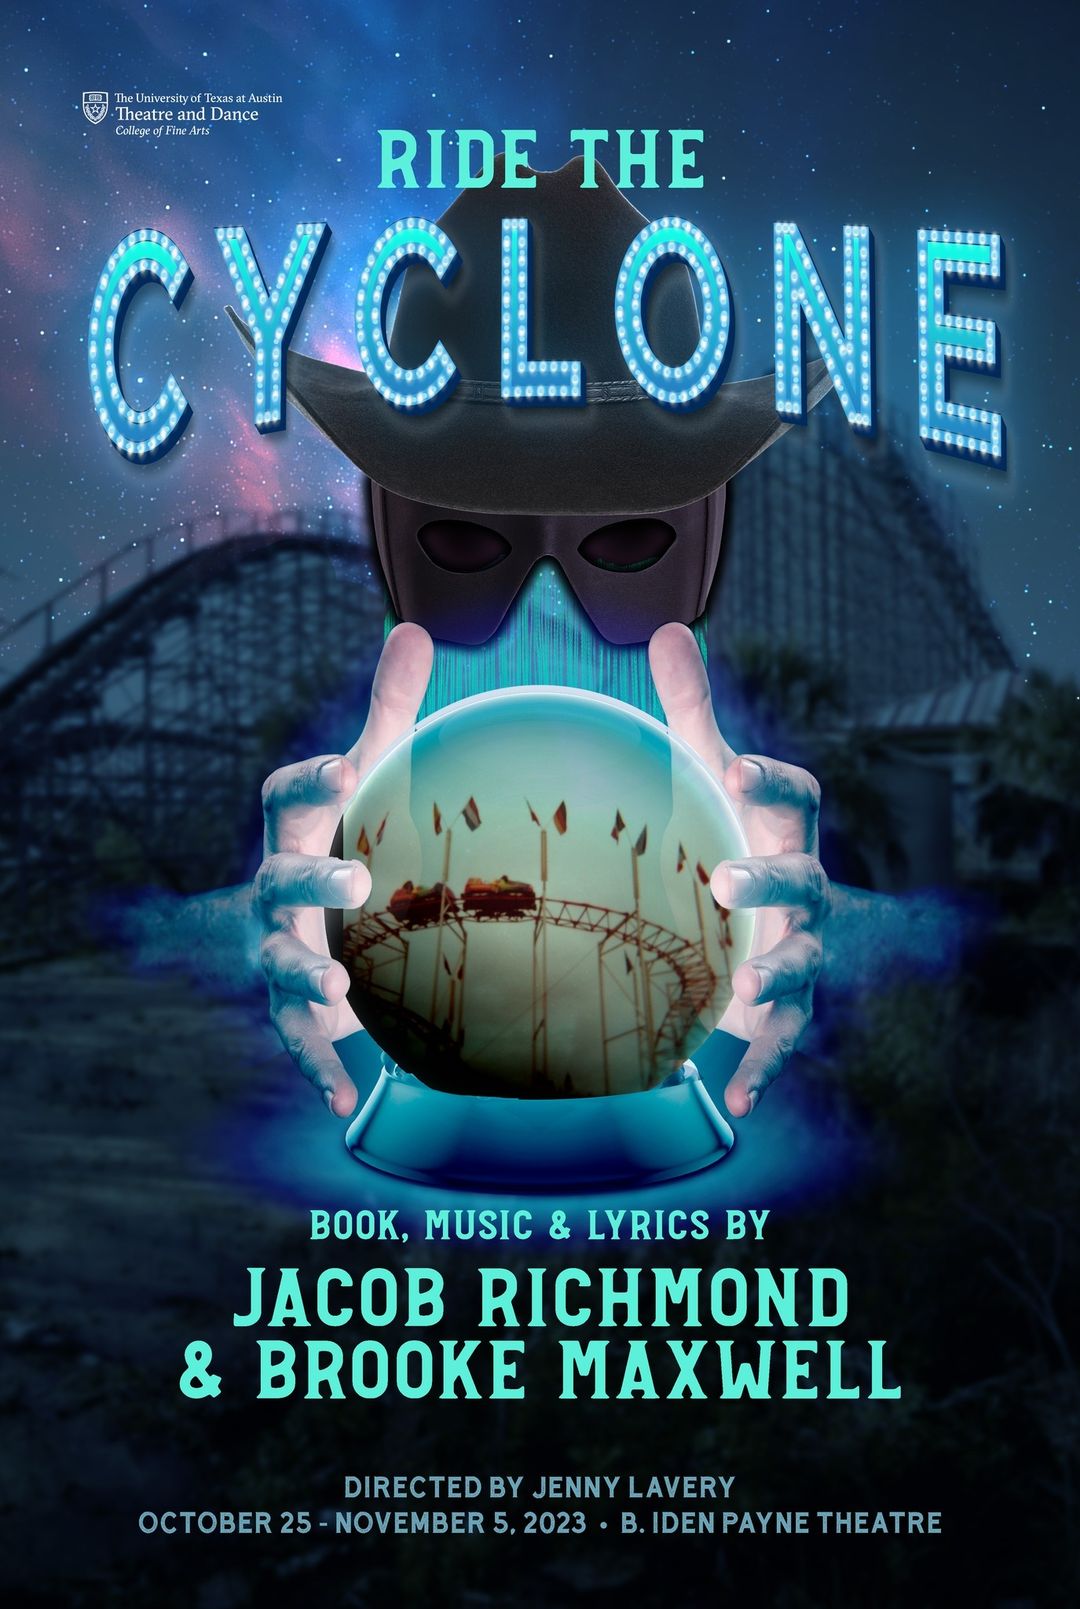 Ride the Cyclone by University of Texas Theatre & Dance